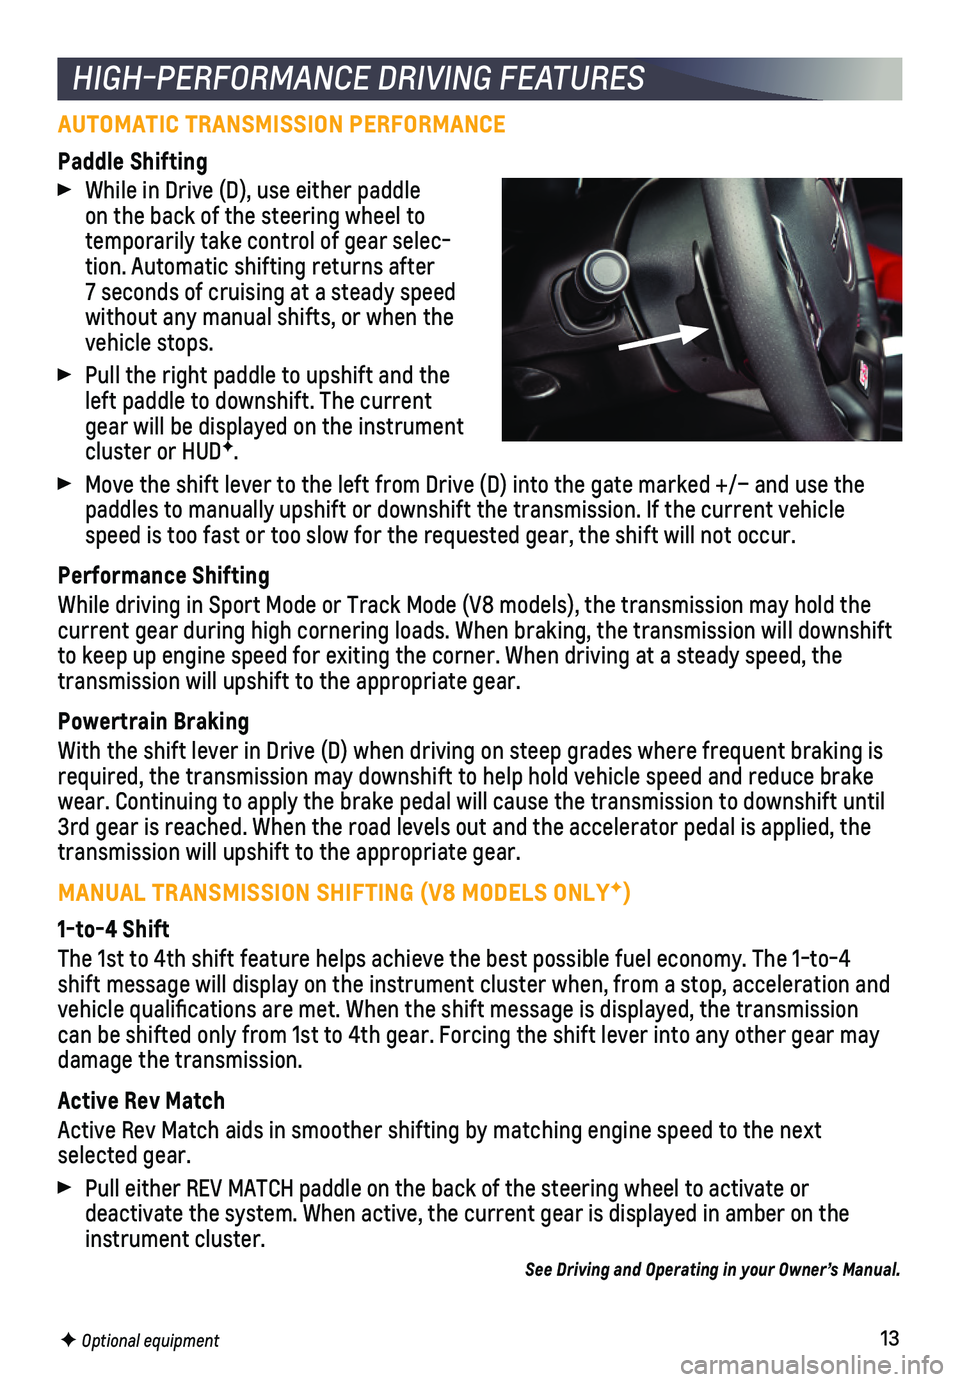 CHEVROLET CAMARO 2018  Get To Know Guide 13
AUTOMATIC TRANSMISSION PERFORMANCE
Paddle Shifting
 While in Drive (D), use either paddle on the back of the steering wheel to temporarily take control of gear selec-tion. Automatic shifting retur